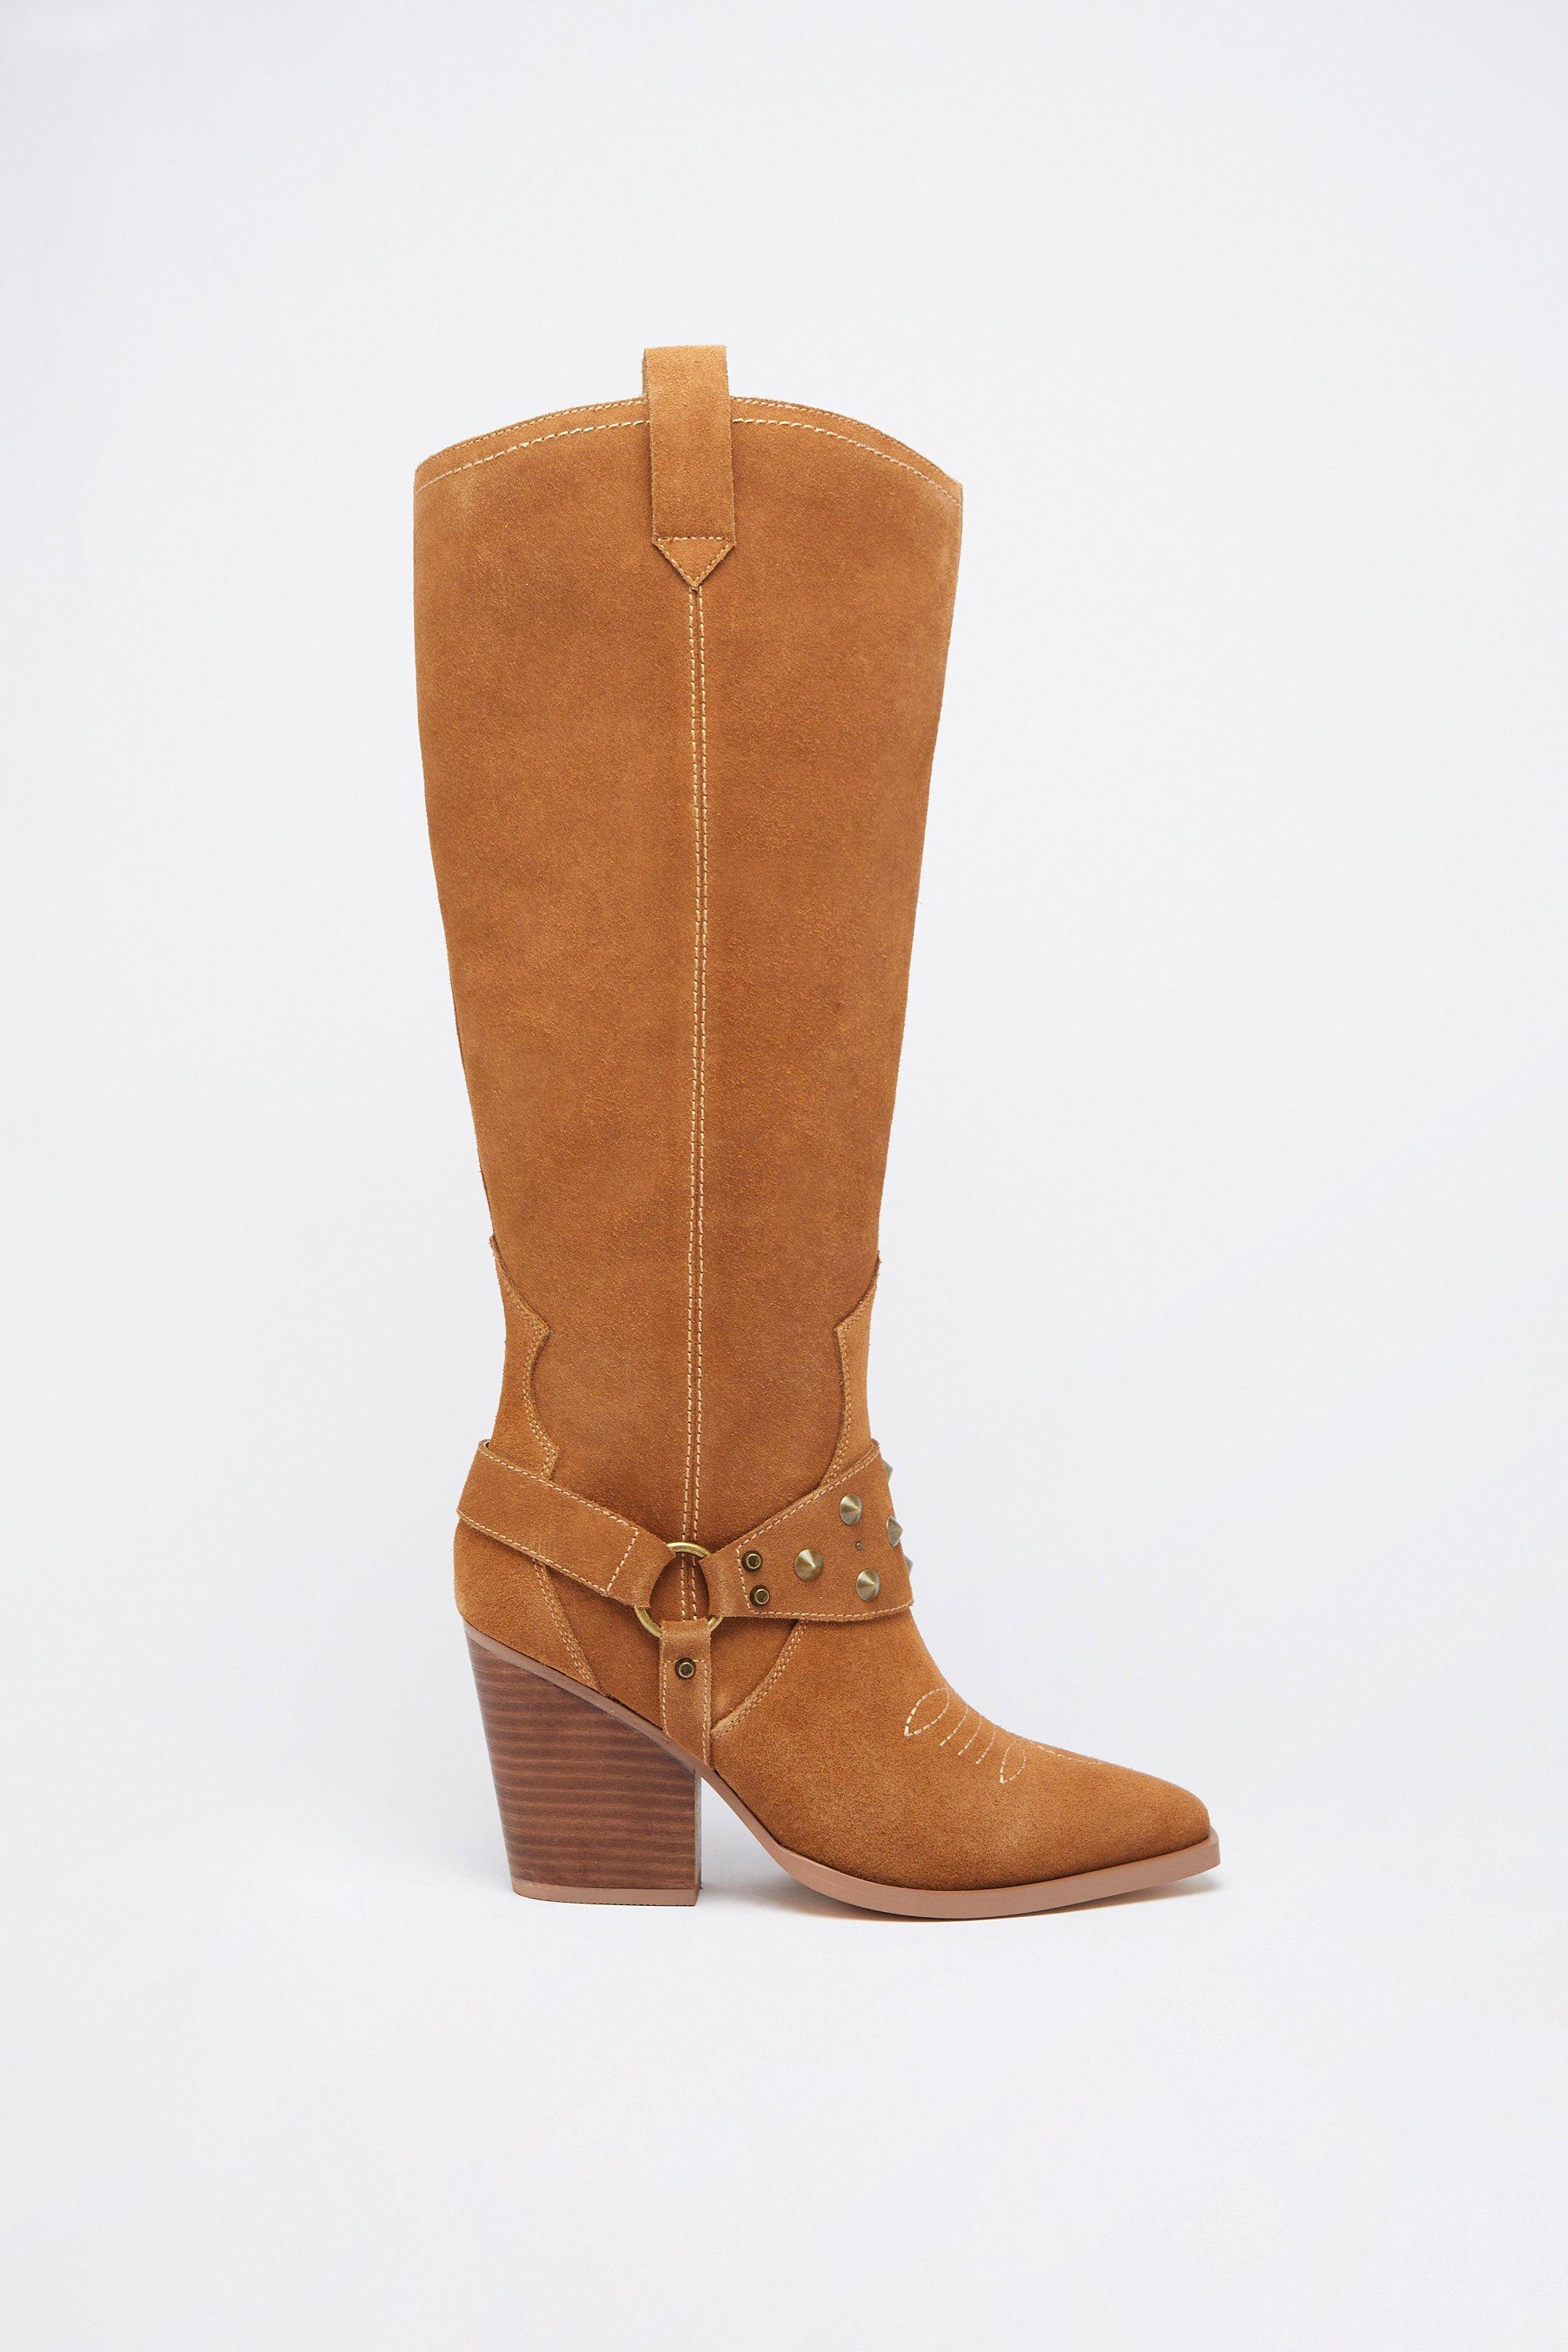 Womens Suede Harness Detail Knee High Cowboy Boot - tan